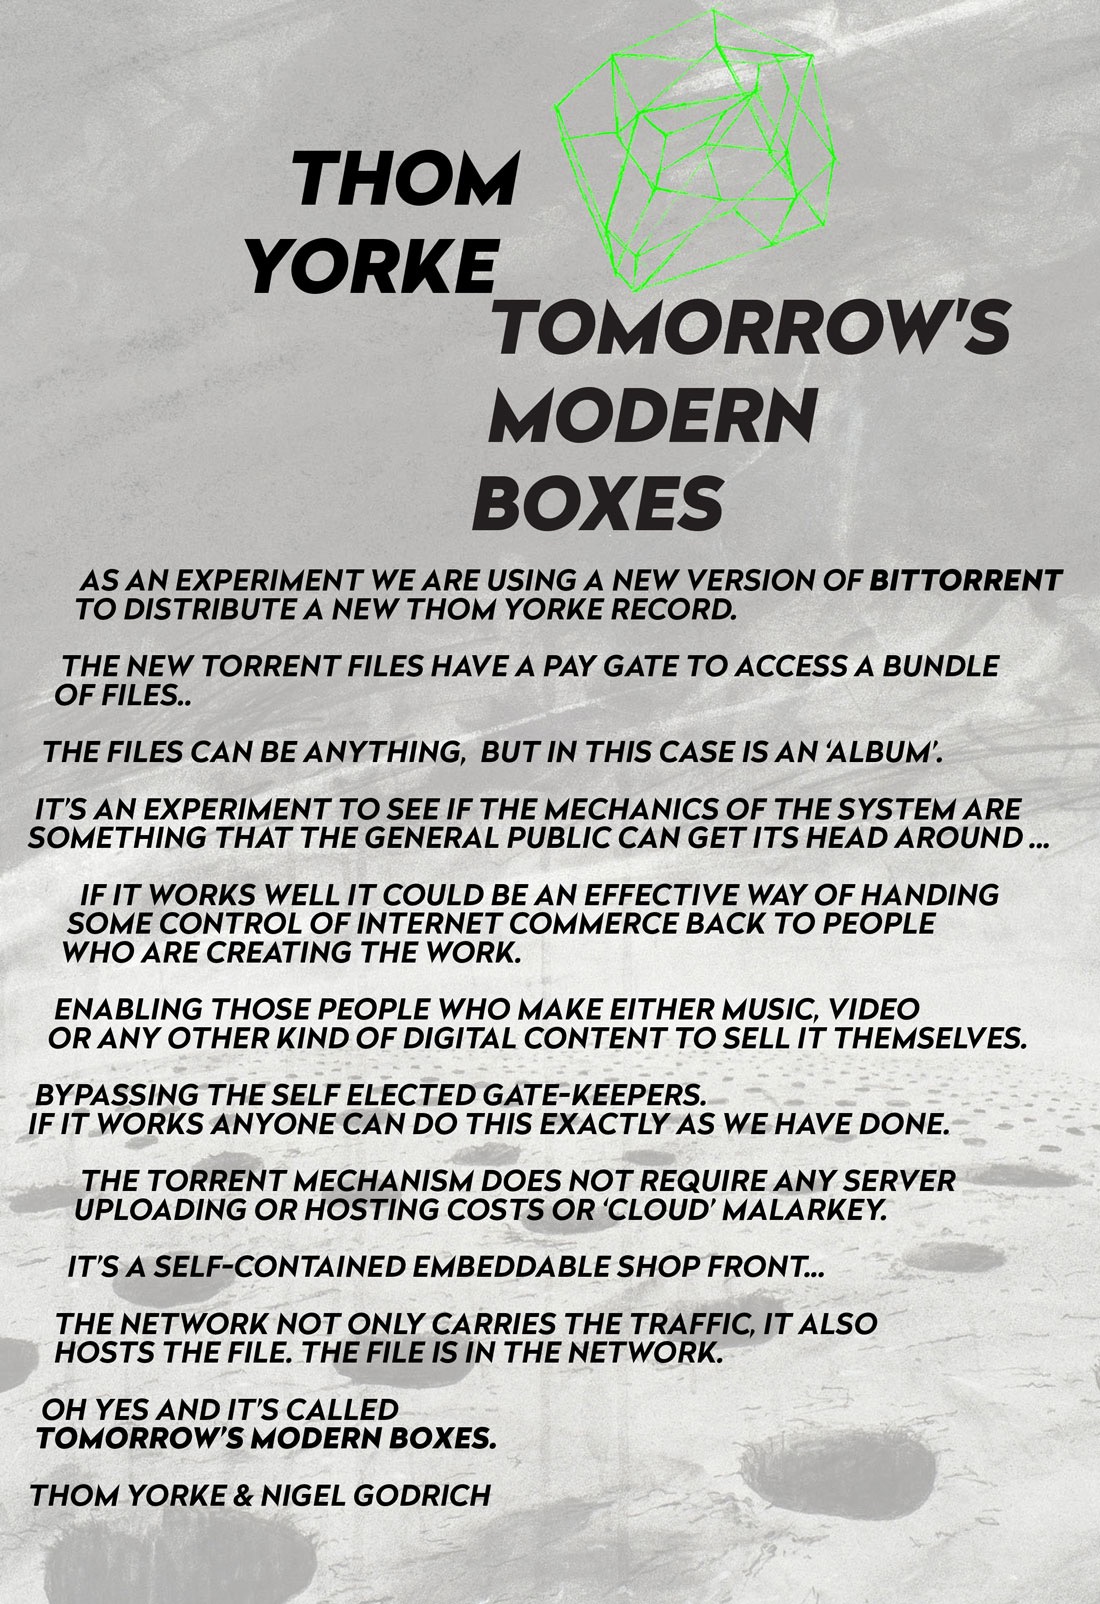 Thom Yorke's Surprise Is Nothing New